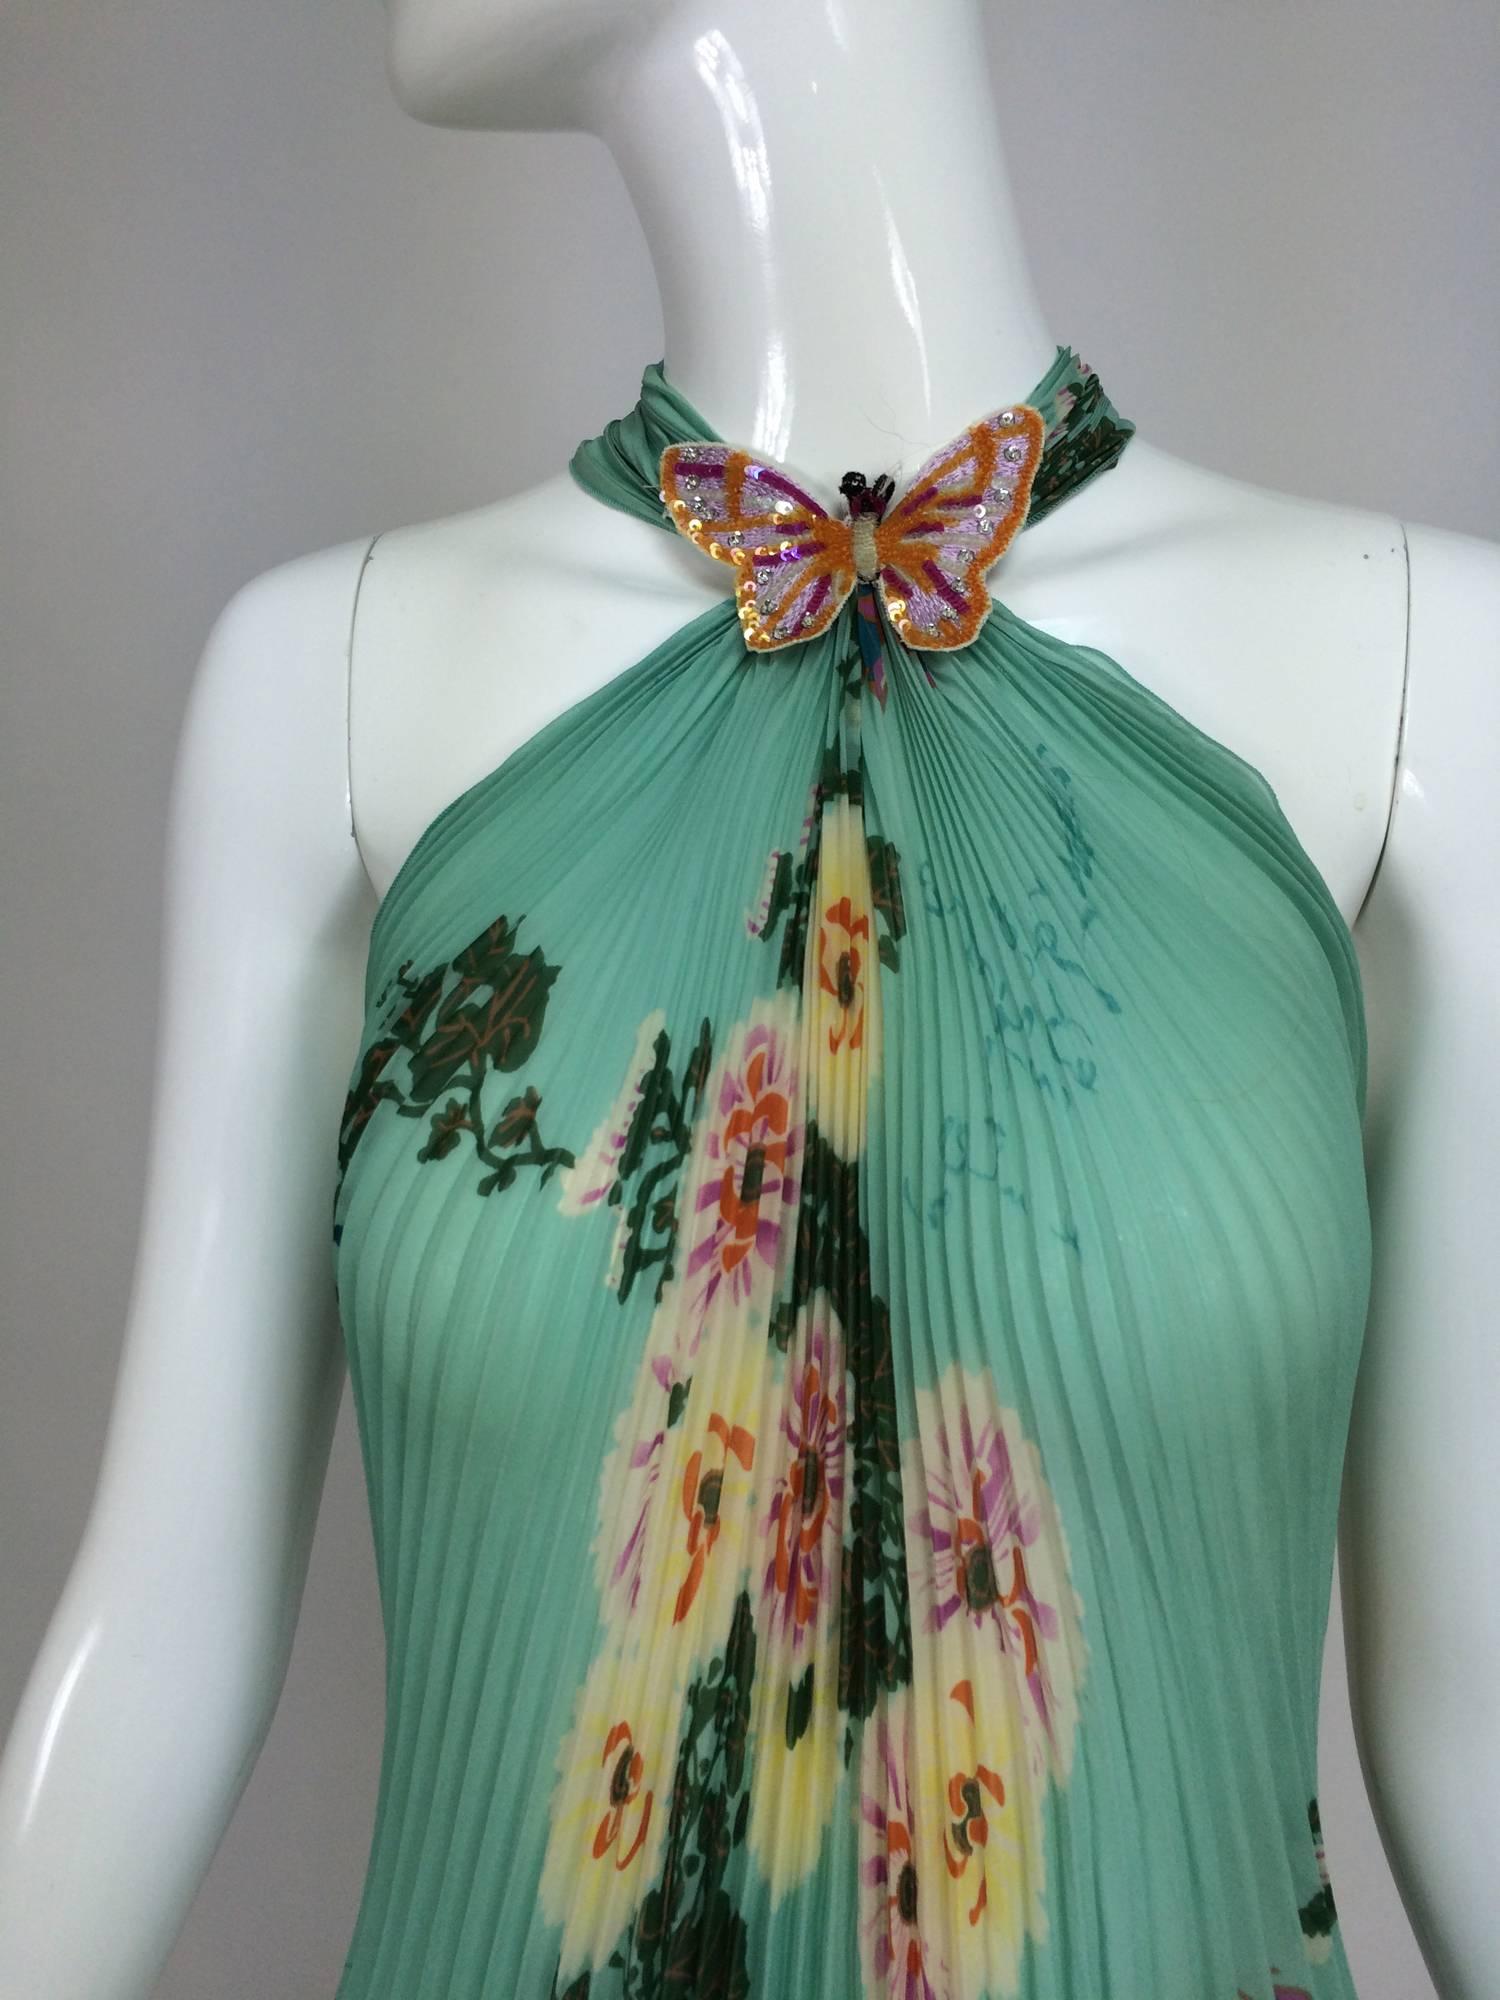 Ungaro aqua floral print pleated silk chiffon butterfly halter top...Pretty knife pleated floral print chiffon halter top has a sequin butterfly applique at the neck front, pulls on and has long pleated ties at the neck back...Unlined...Fits like a